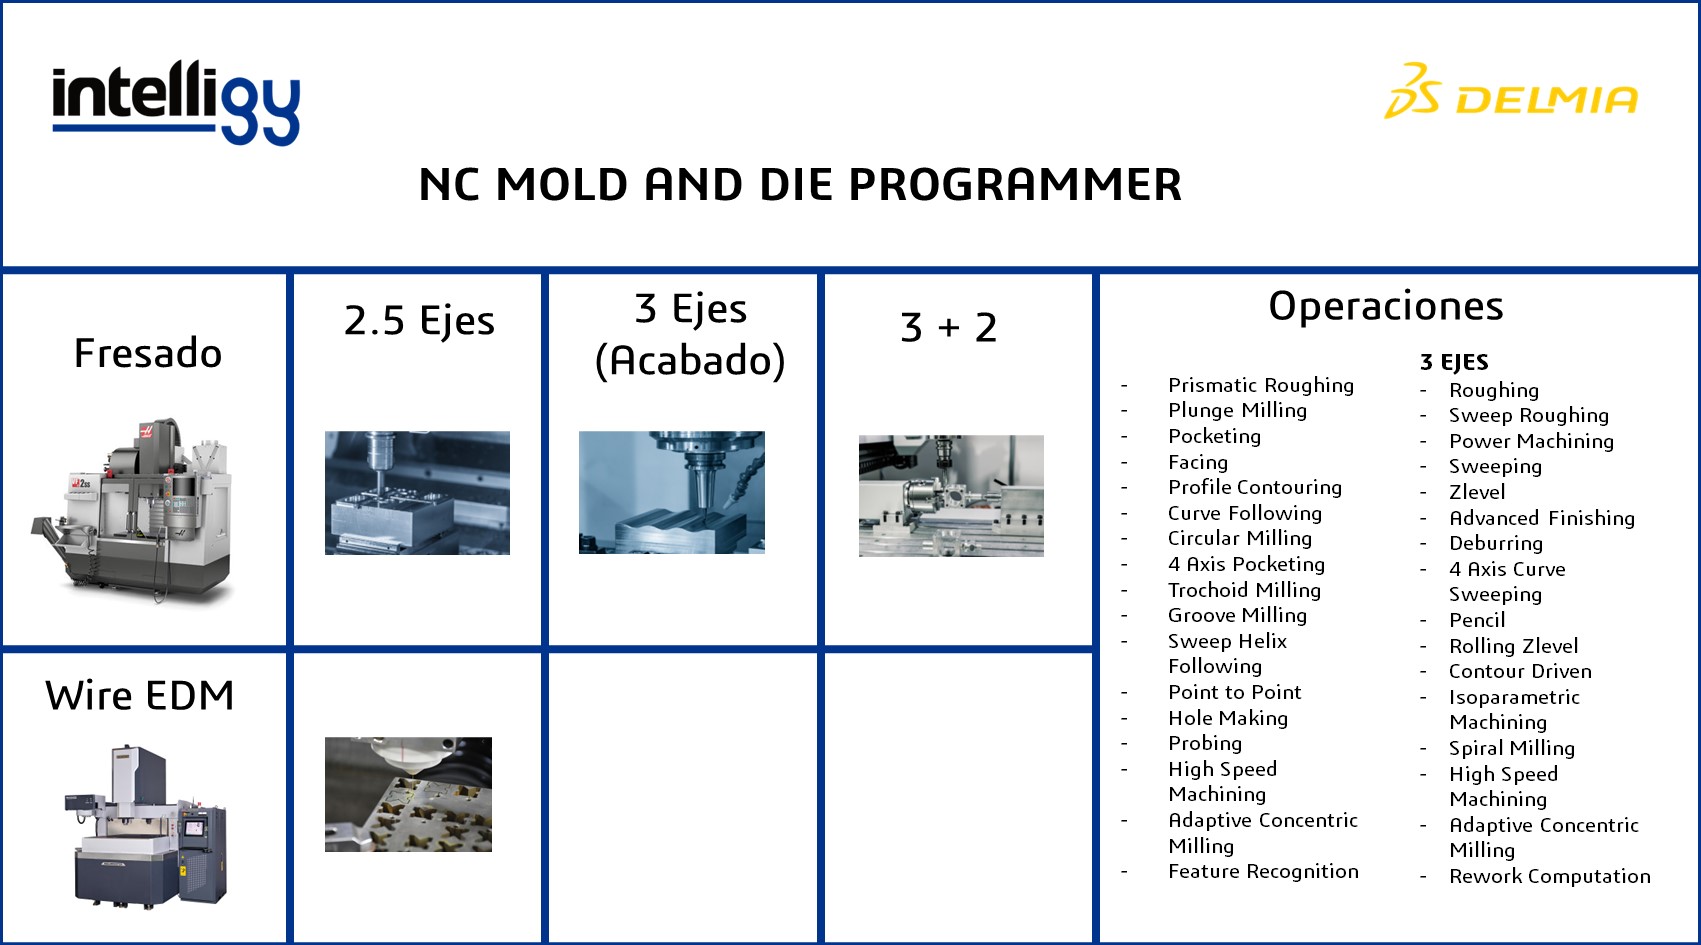 NC MOLD AND DIE PROGRAMMER